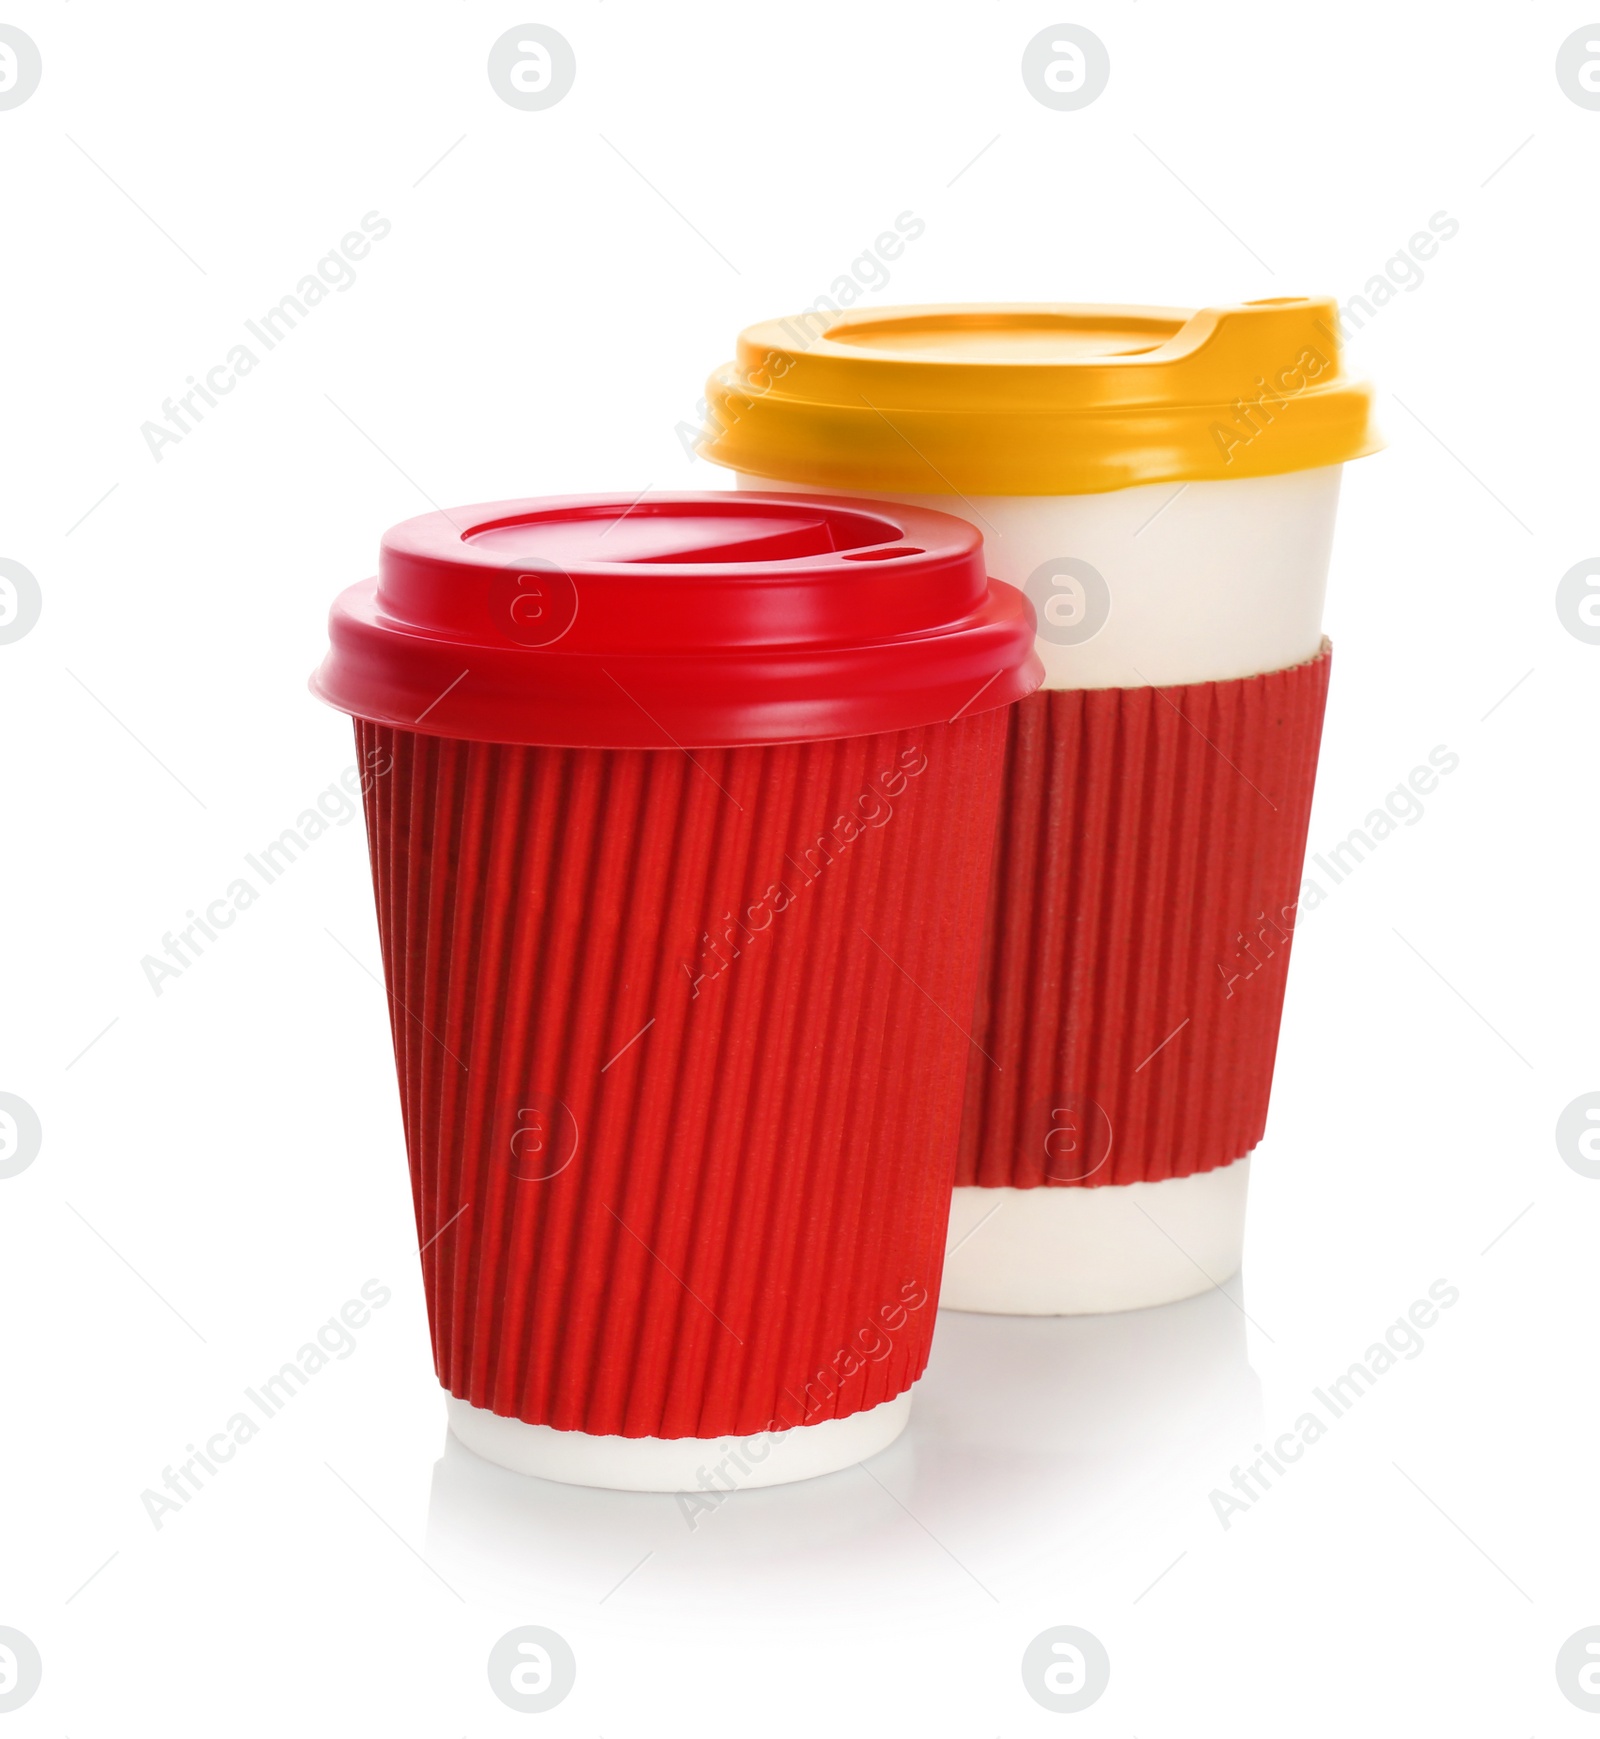 Photo of Takeaway paper coffee cups with lids on white background